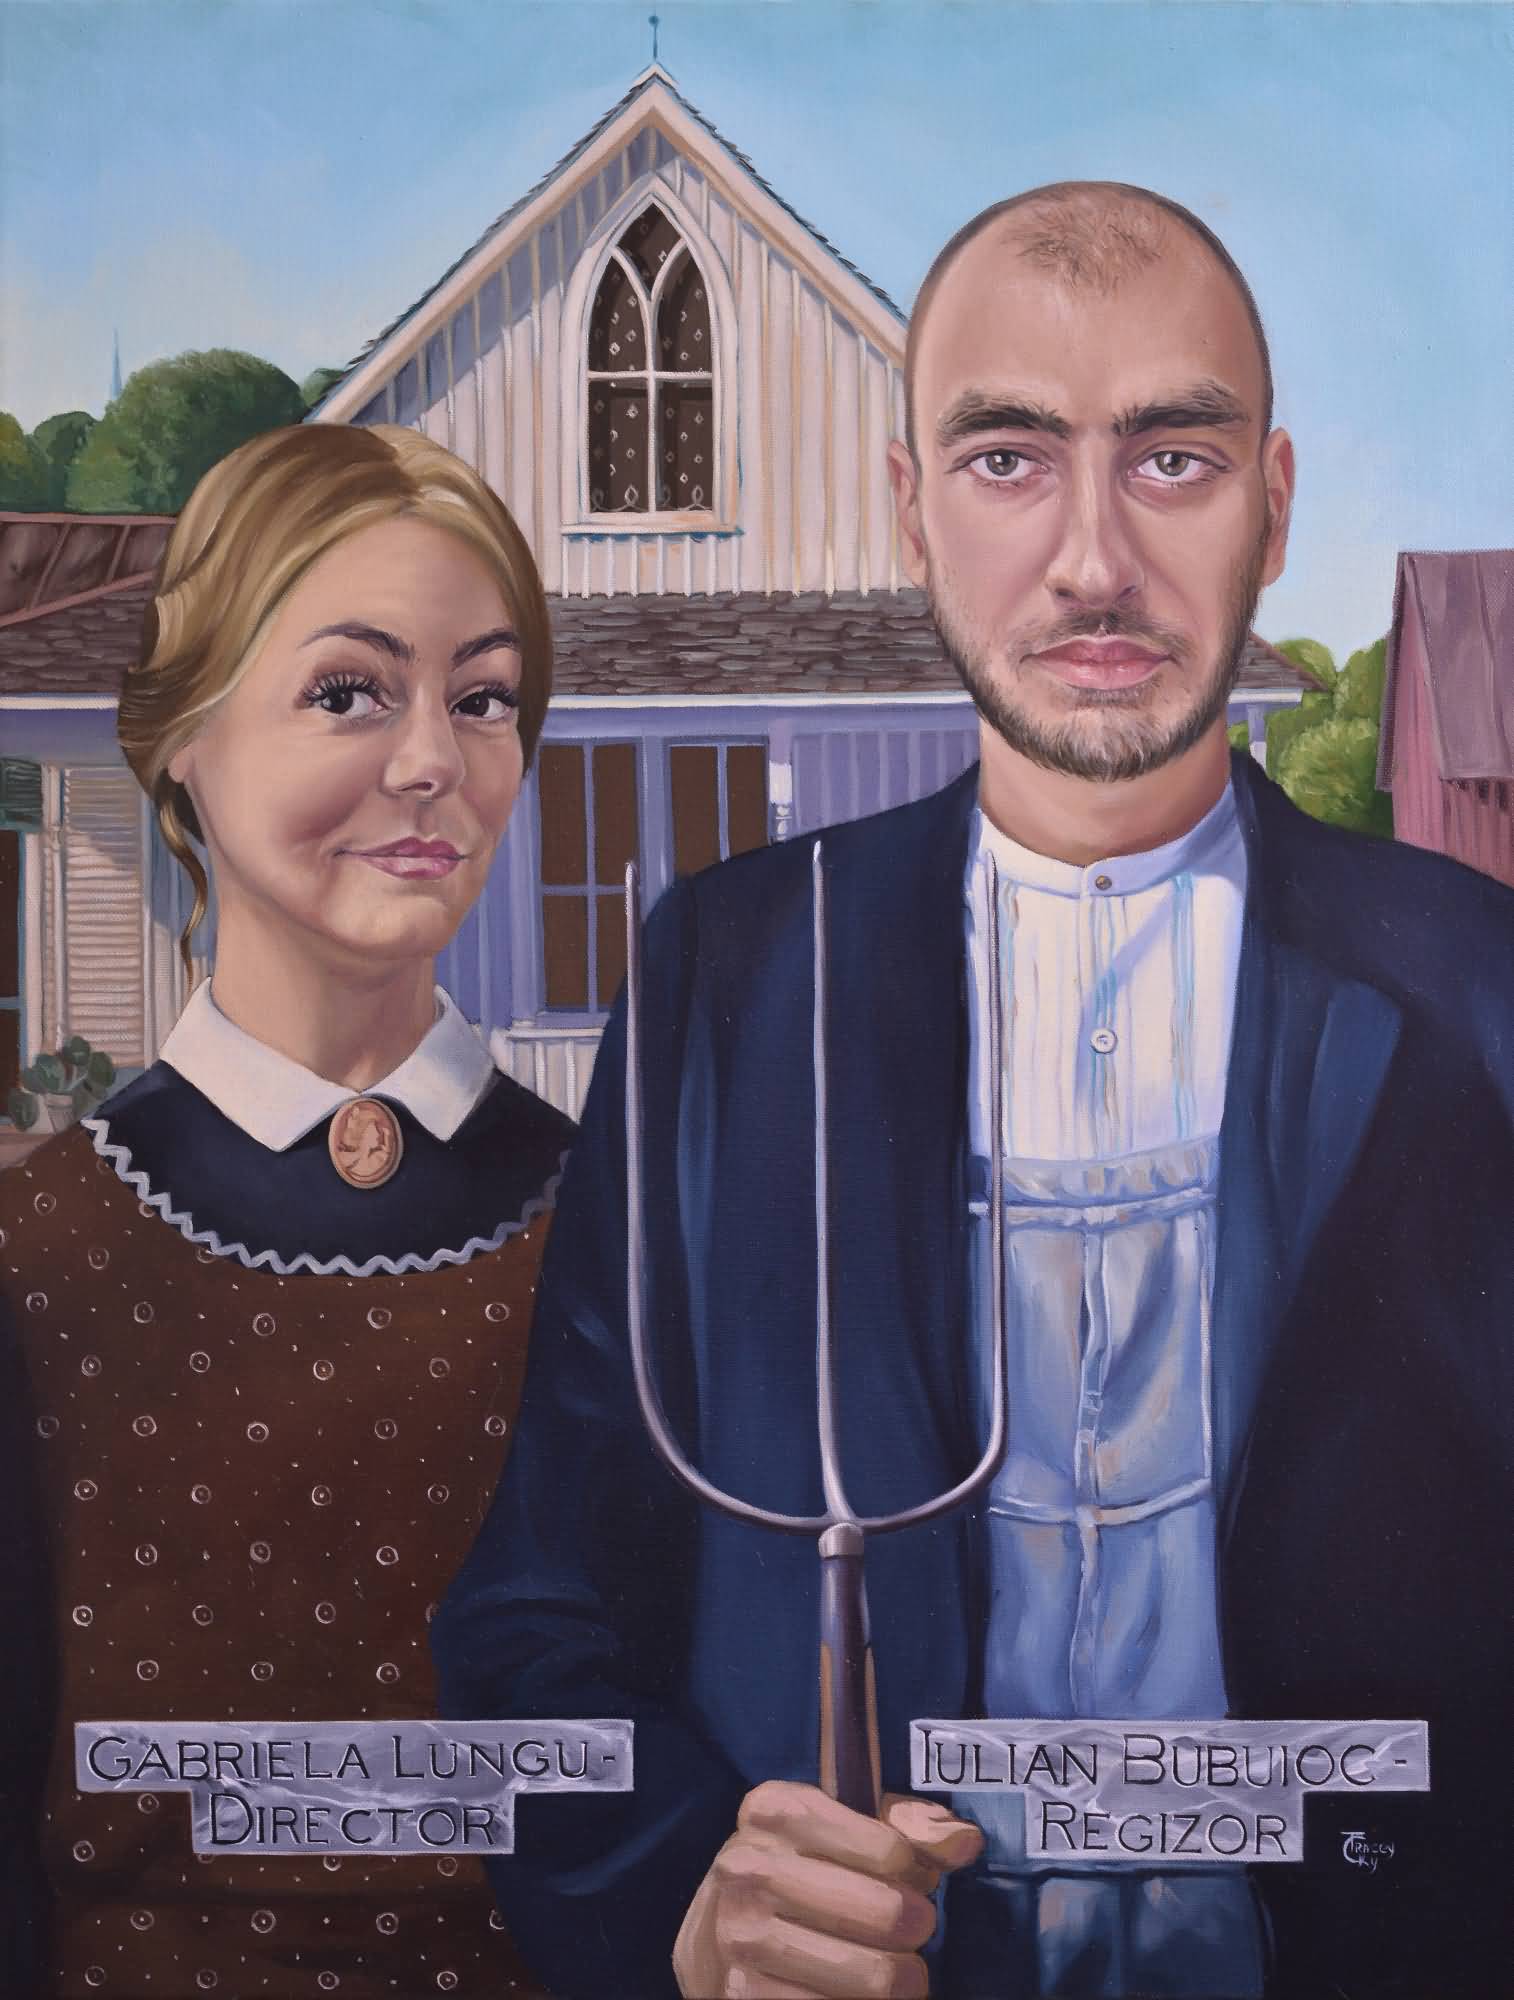 Copy of American Gothic. Oil on canvas 54x65cm 2022